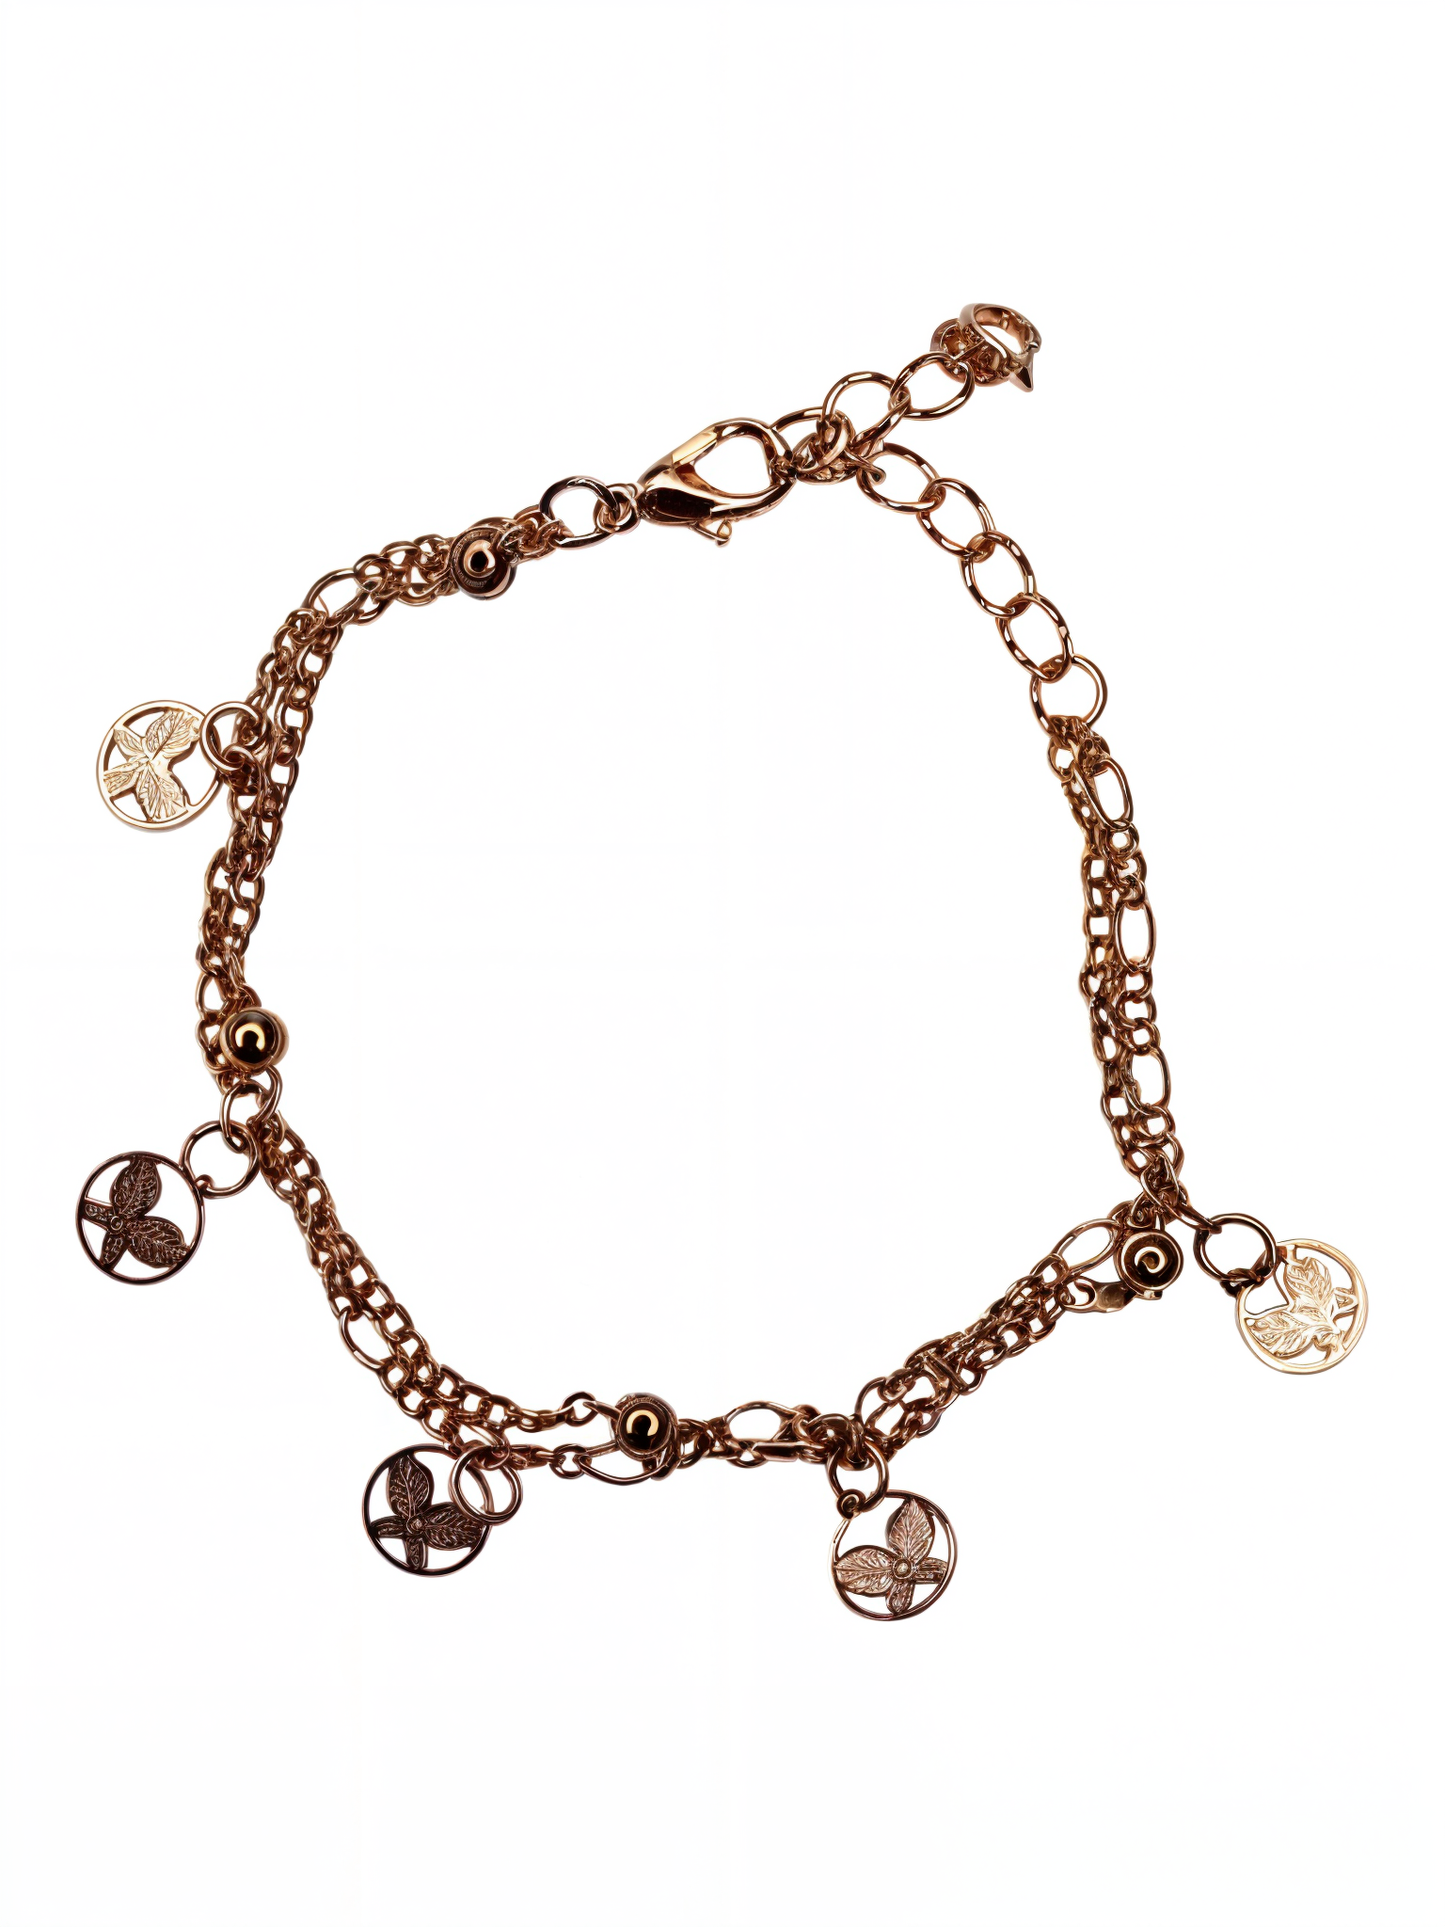 Stylish Double Layered Adjustable Bracelet with Butterfly Charms